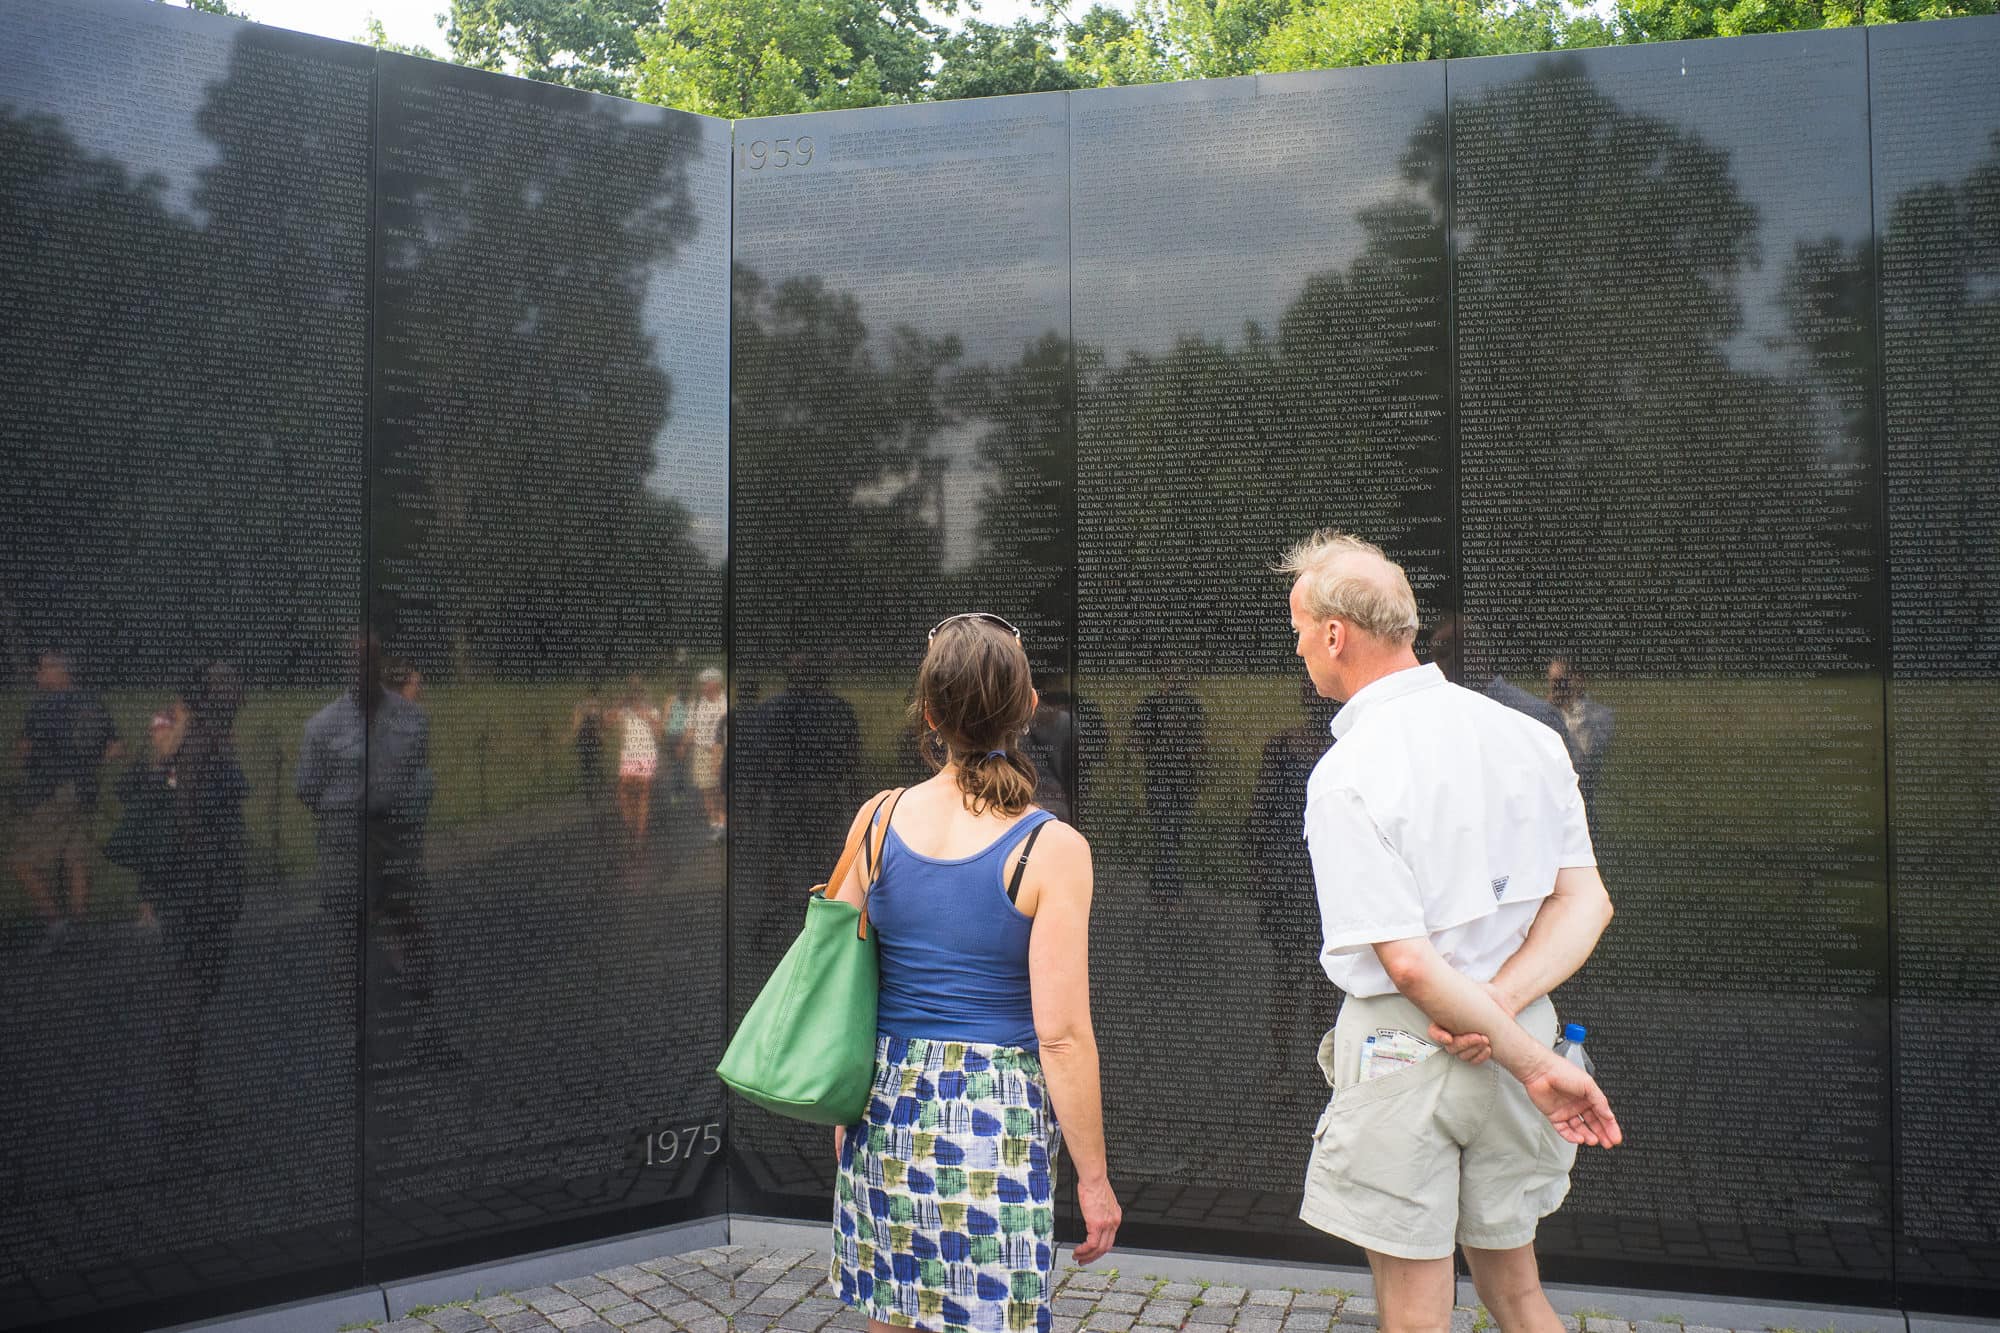 Washington, D.C. - At the Vietnam War Monument two visitors view the beginning and the end of the list of names.